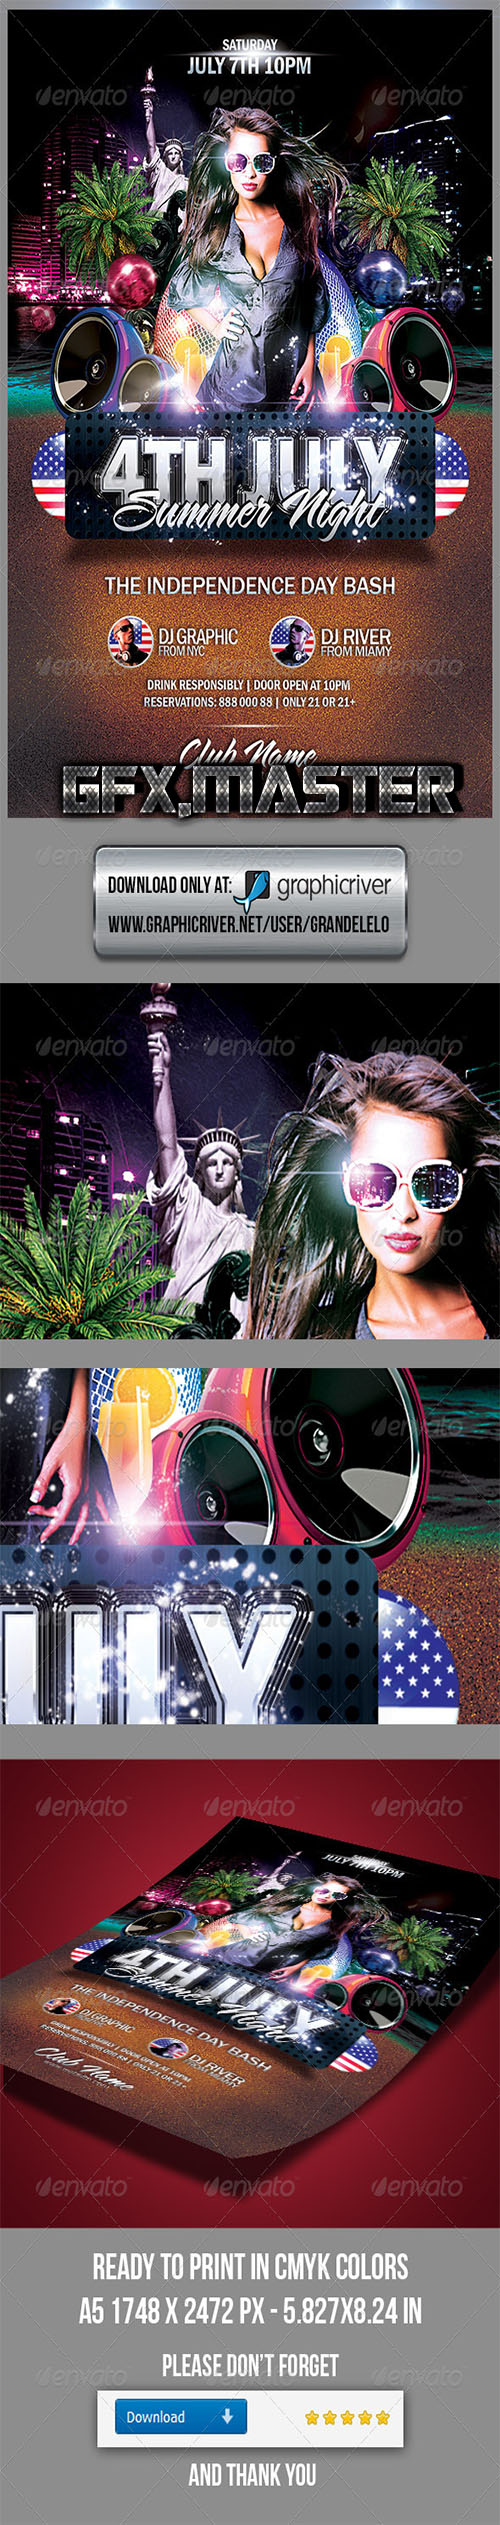 GraphicRiver - 4th July Summer Night